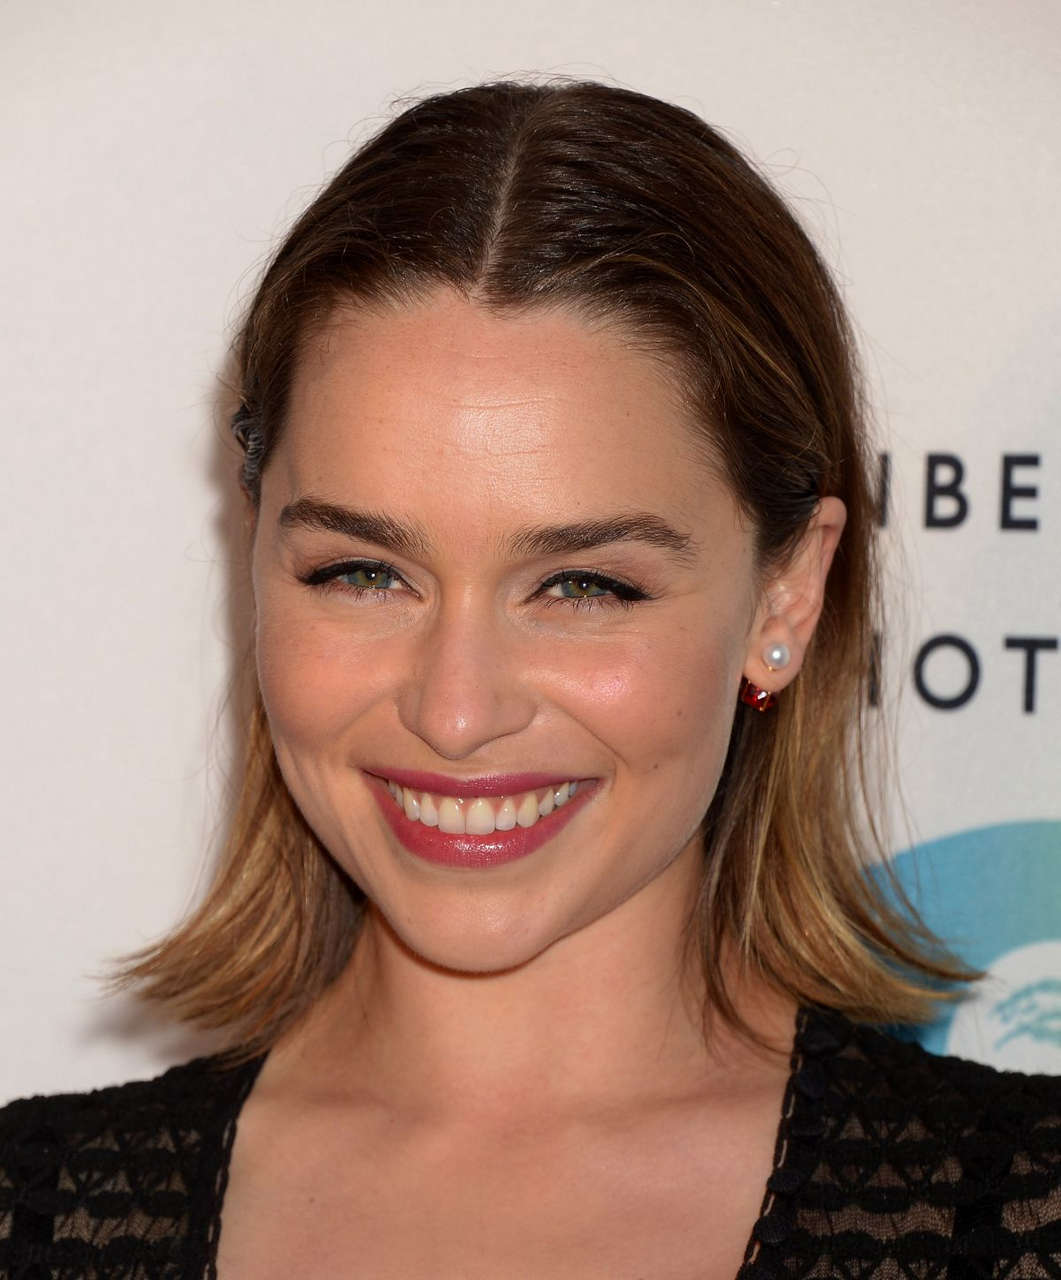 Emilia Clarke Annenberg Space For Photography Presents Refugee Century City